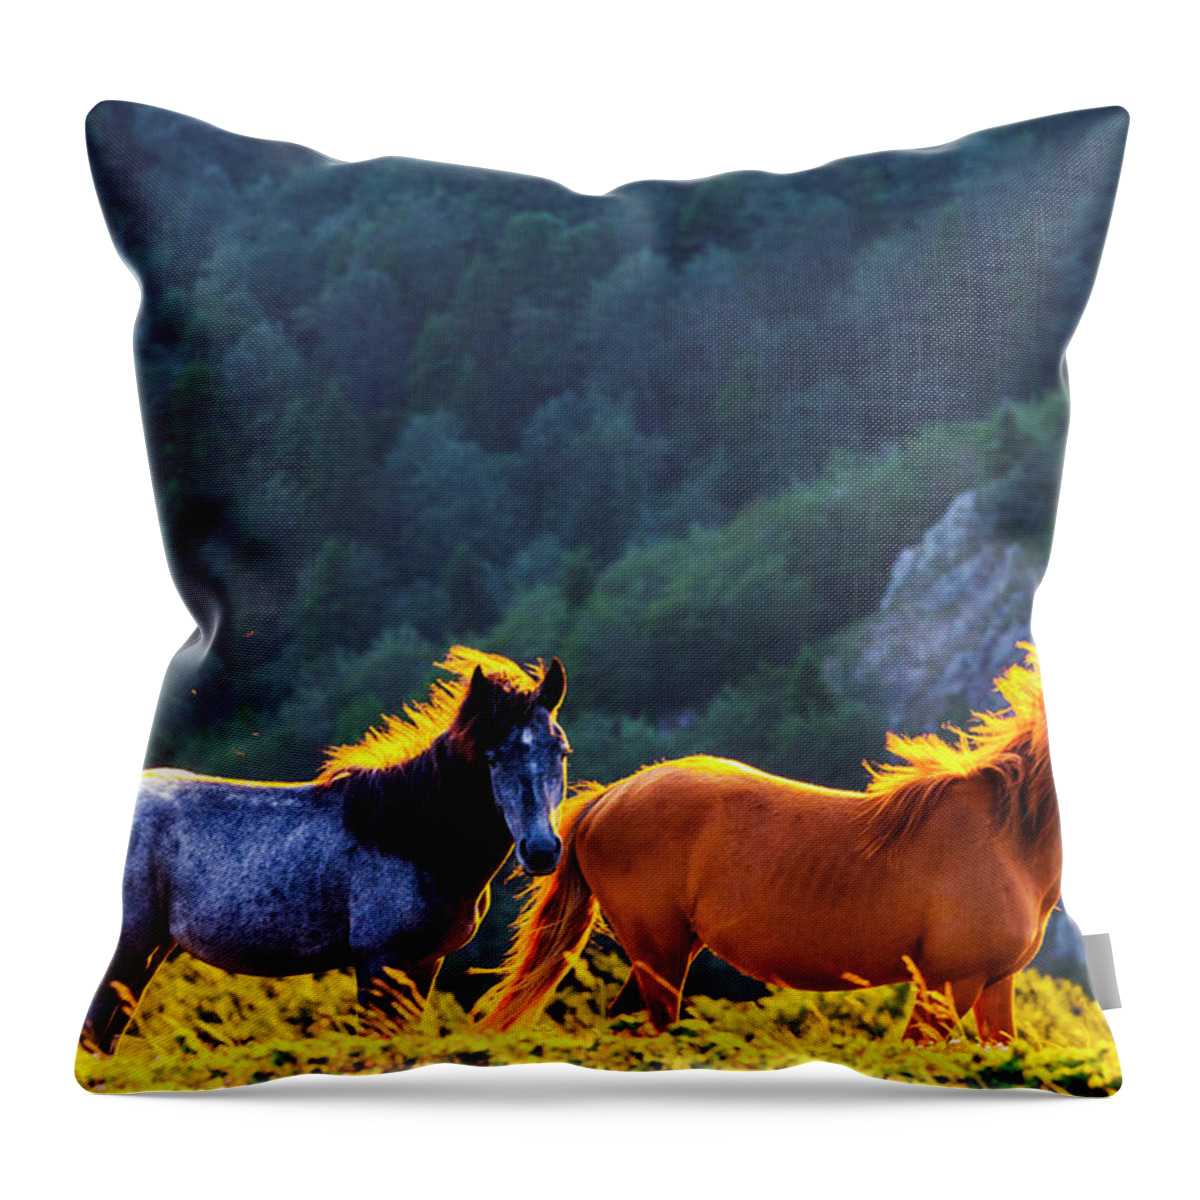 Balkan Mountains Throw Pillow featuring the photograph Wild Horses by Evgeni Dinev